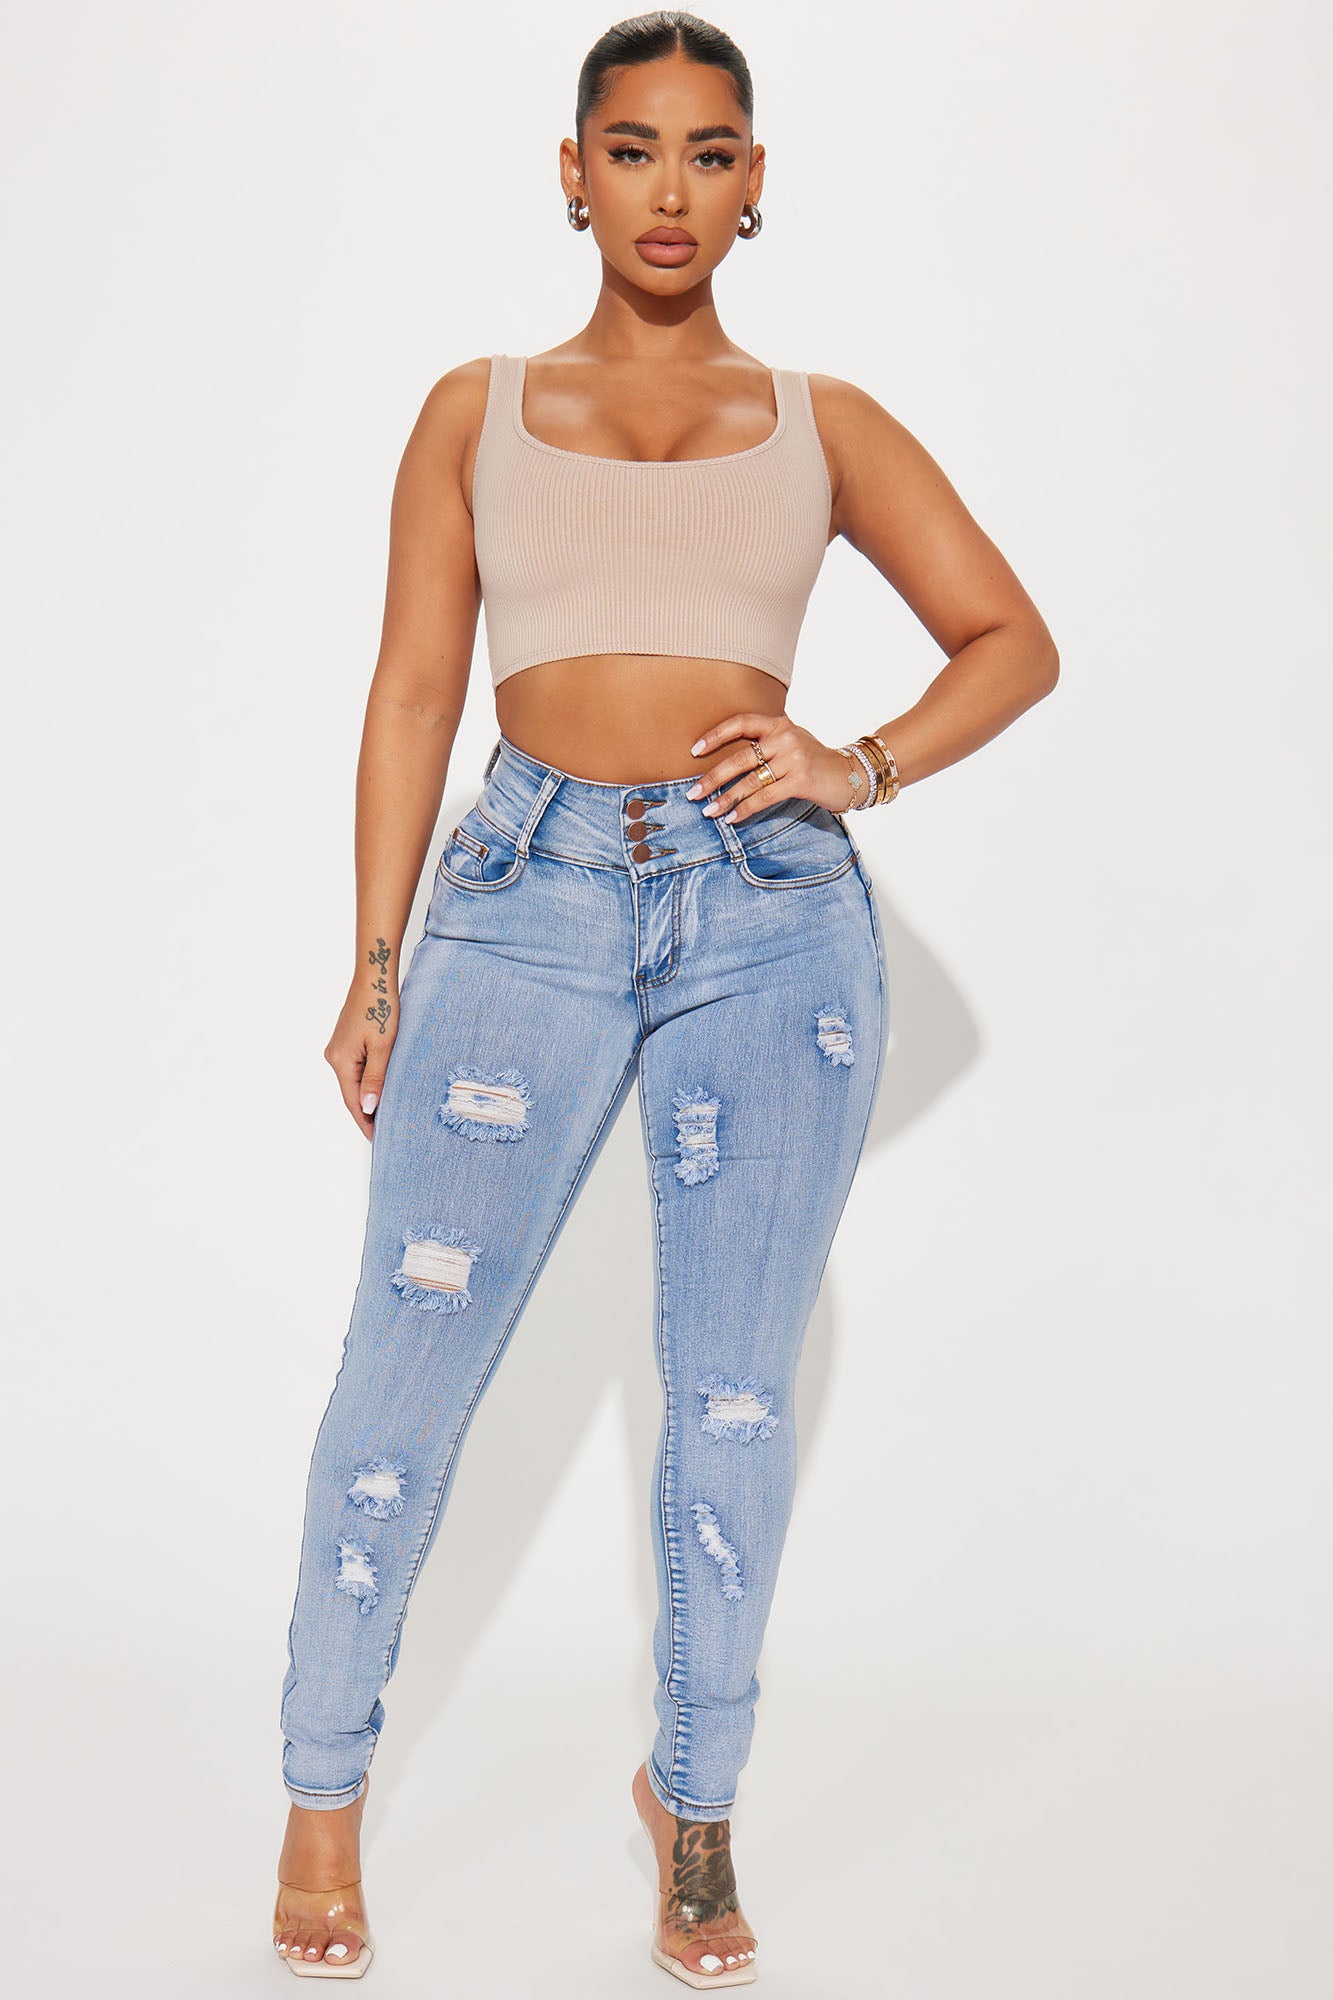 Baby Got Back Booty Lifting Jeans - Light Blue Wash